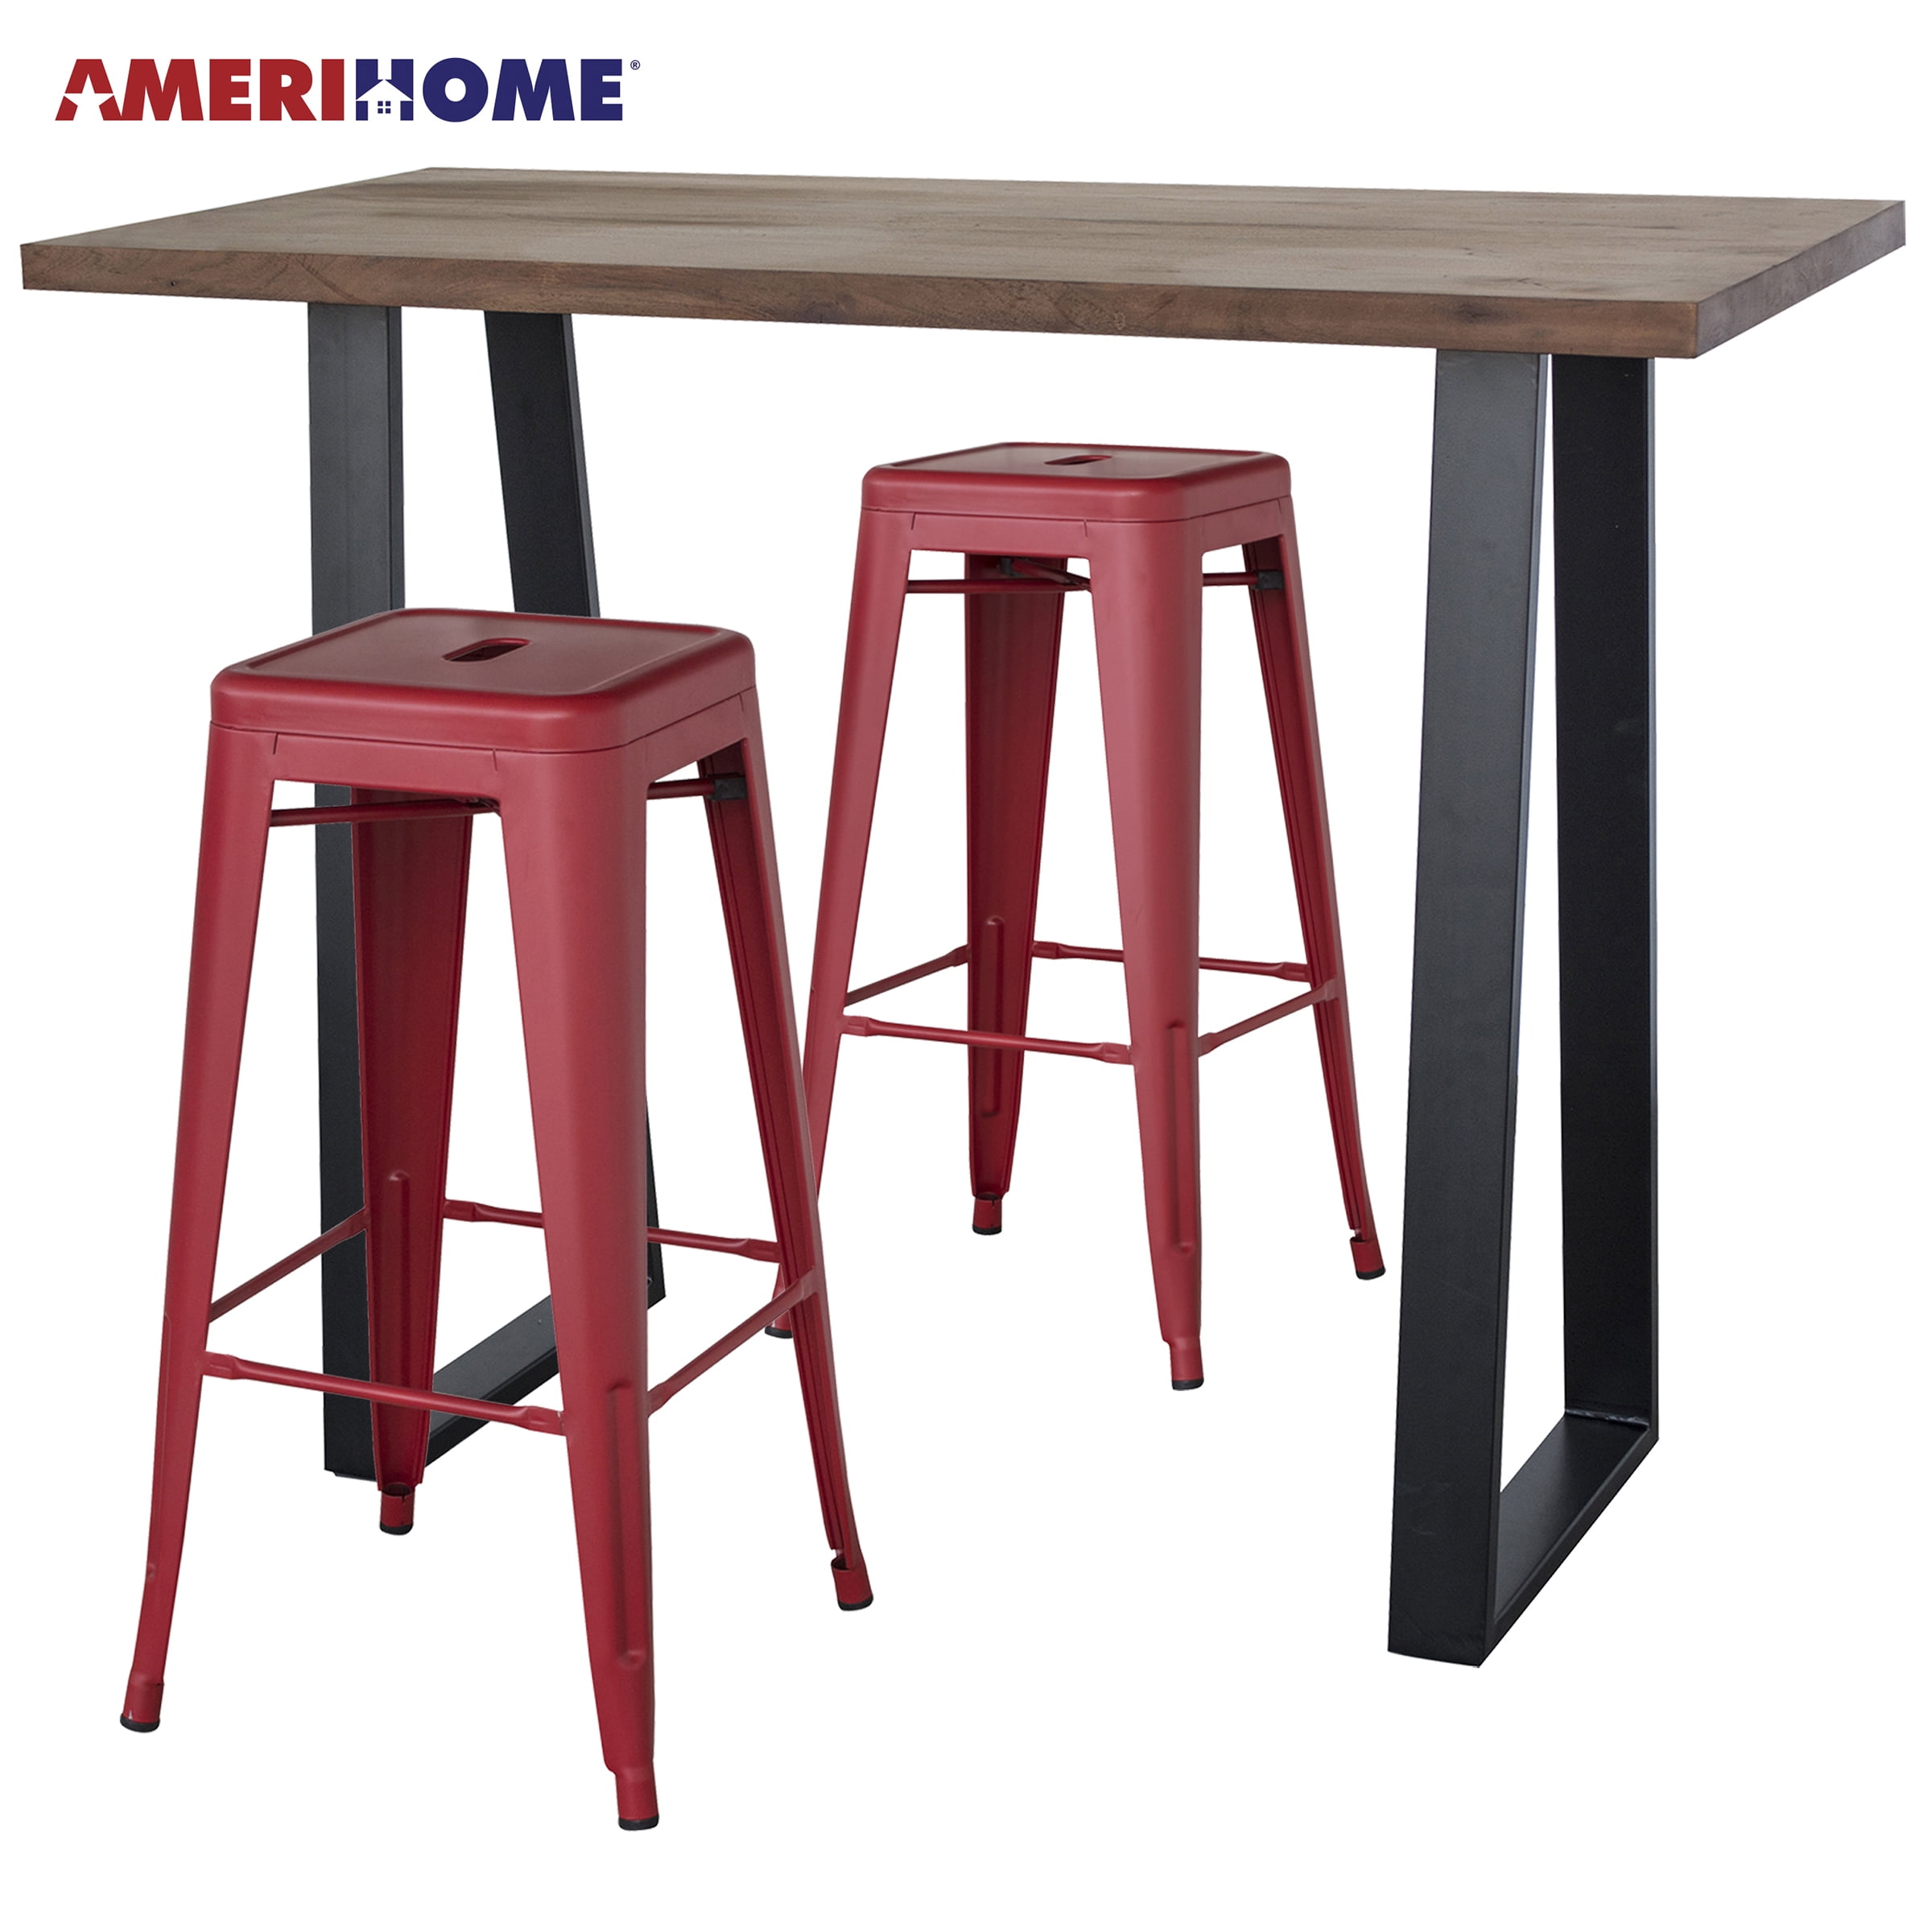 Picture of AmeriHome AWBTRZ2 Acacia Wood Top Bar Height Pub Set with Matte Red Bar Stools - Red&#44; Black & Natural Wood - 3 Piece